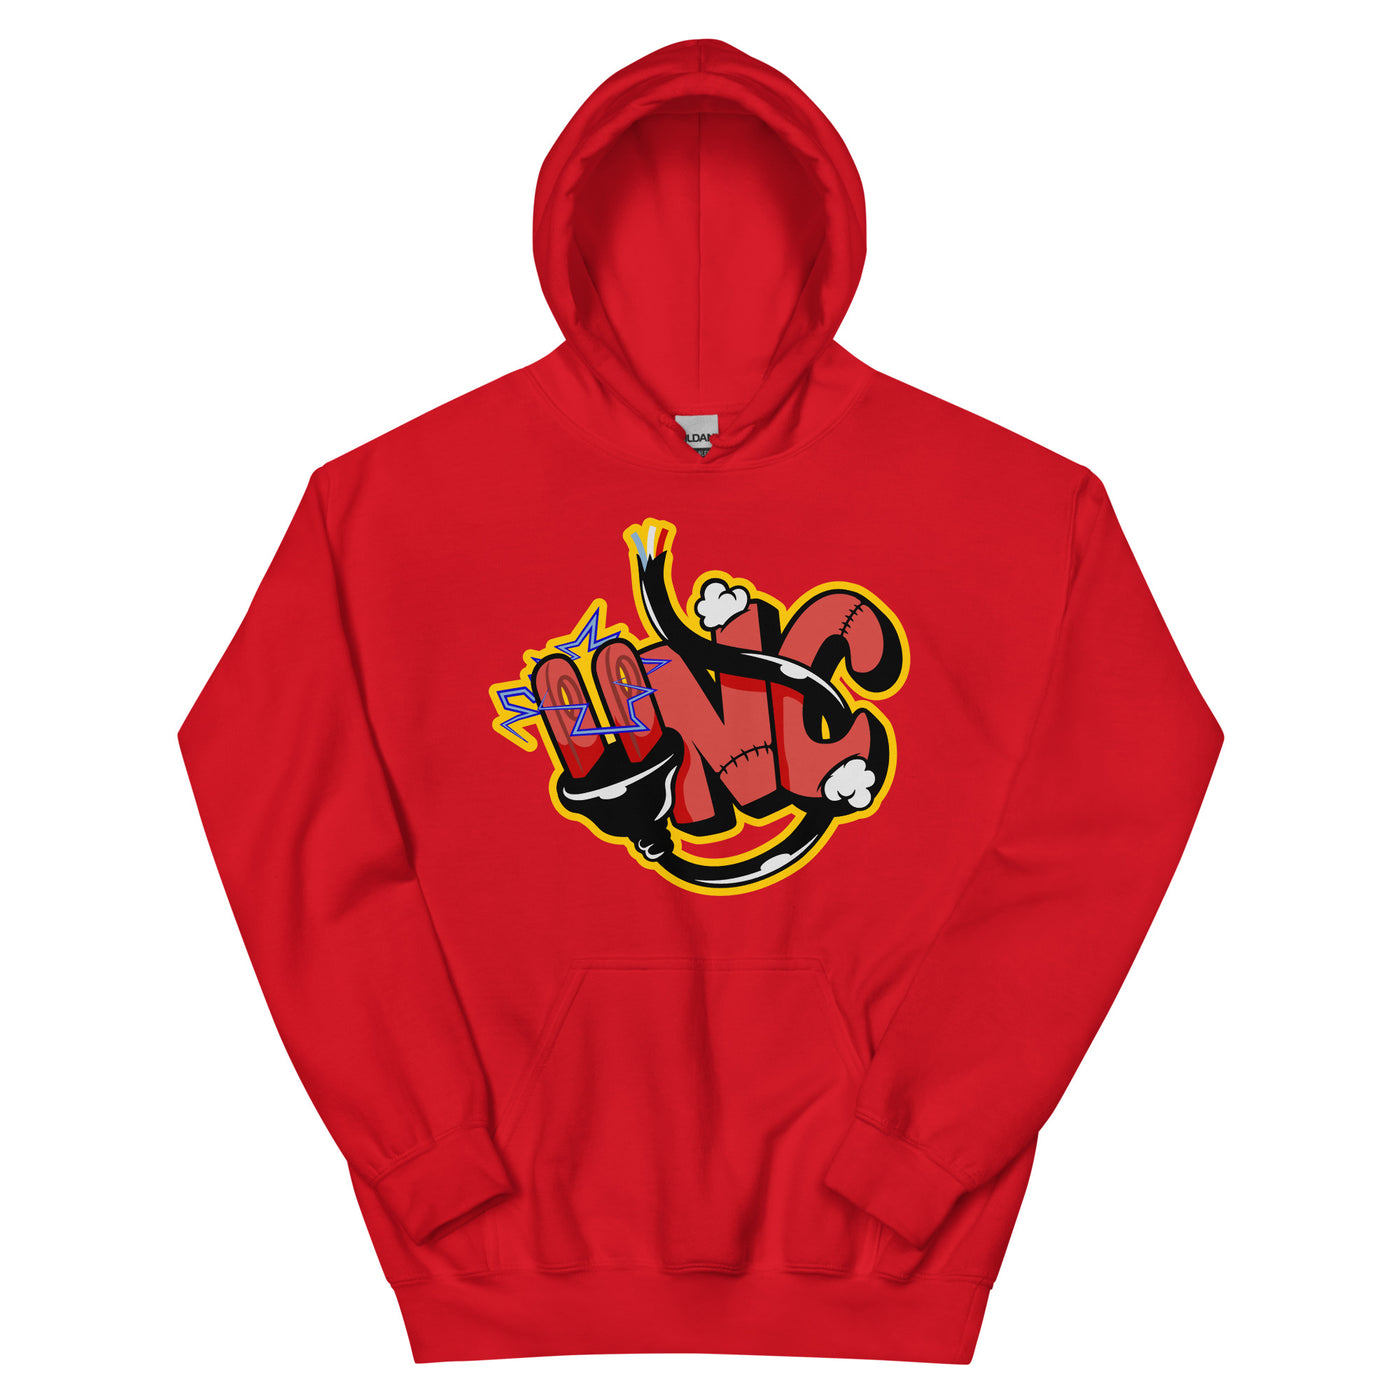 UNC Plugged In hoodie (Red Yellow) - Unique Sweatsuits, hats, tees, shorts, hoodies, Outwear & accessories online | Uneekly Nsane